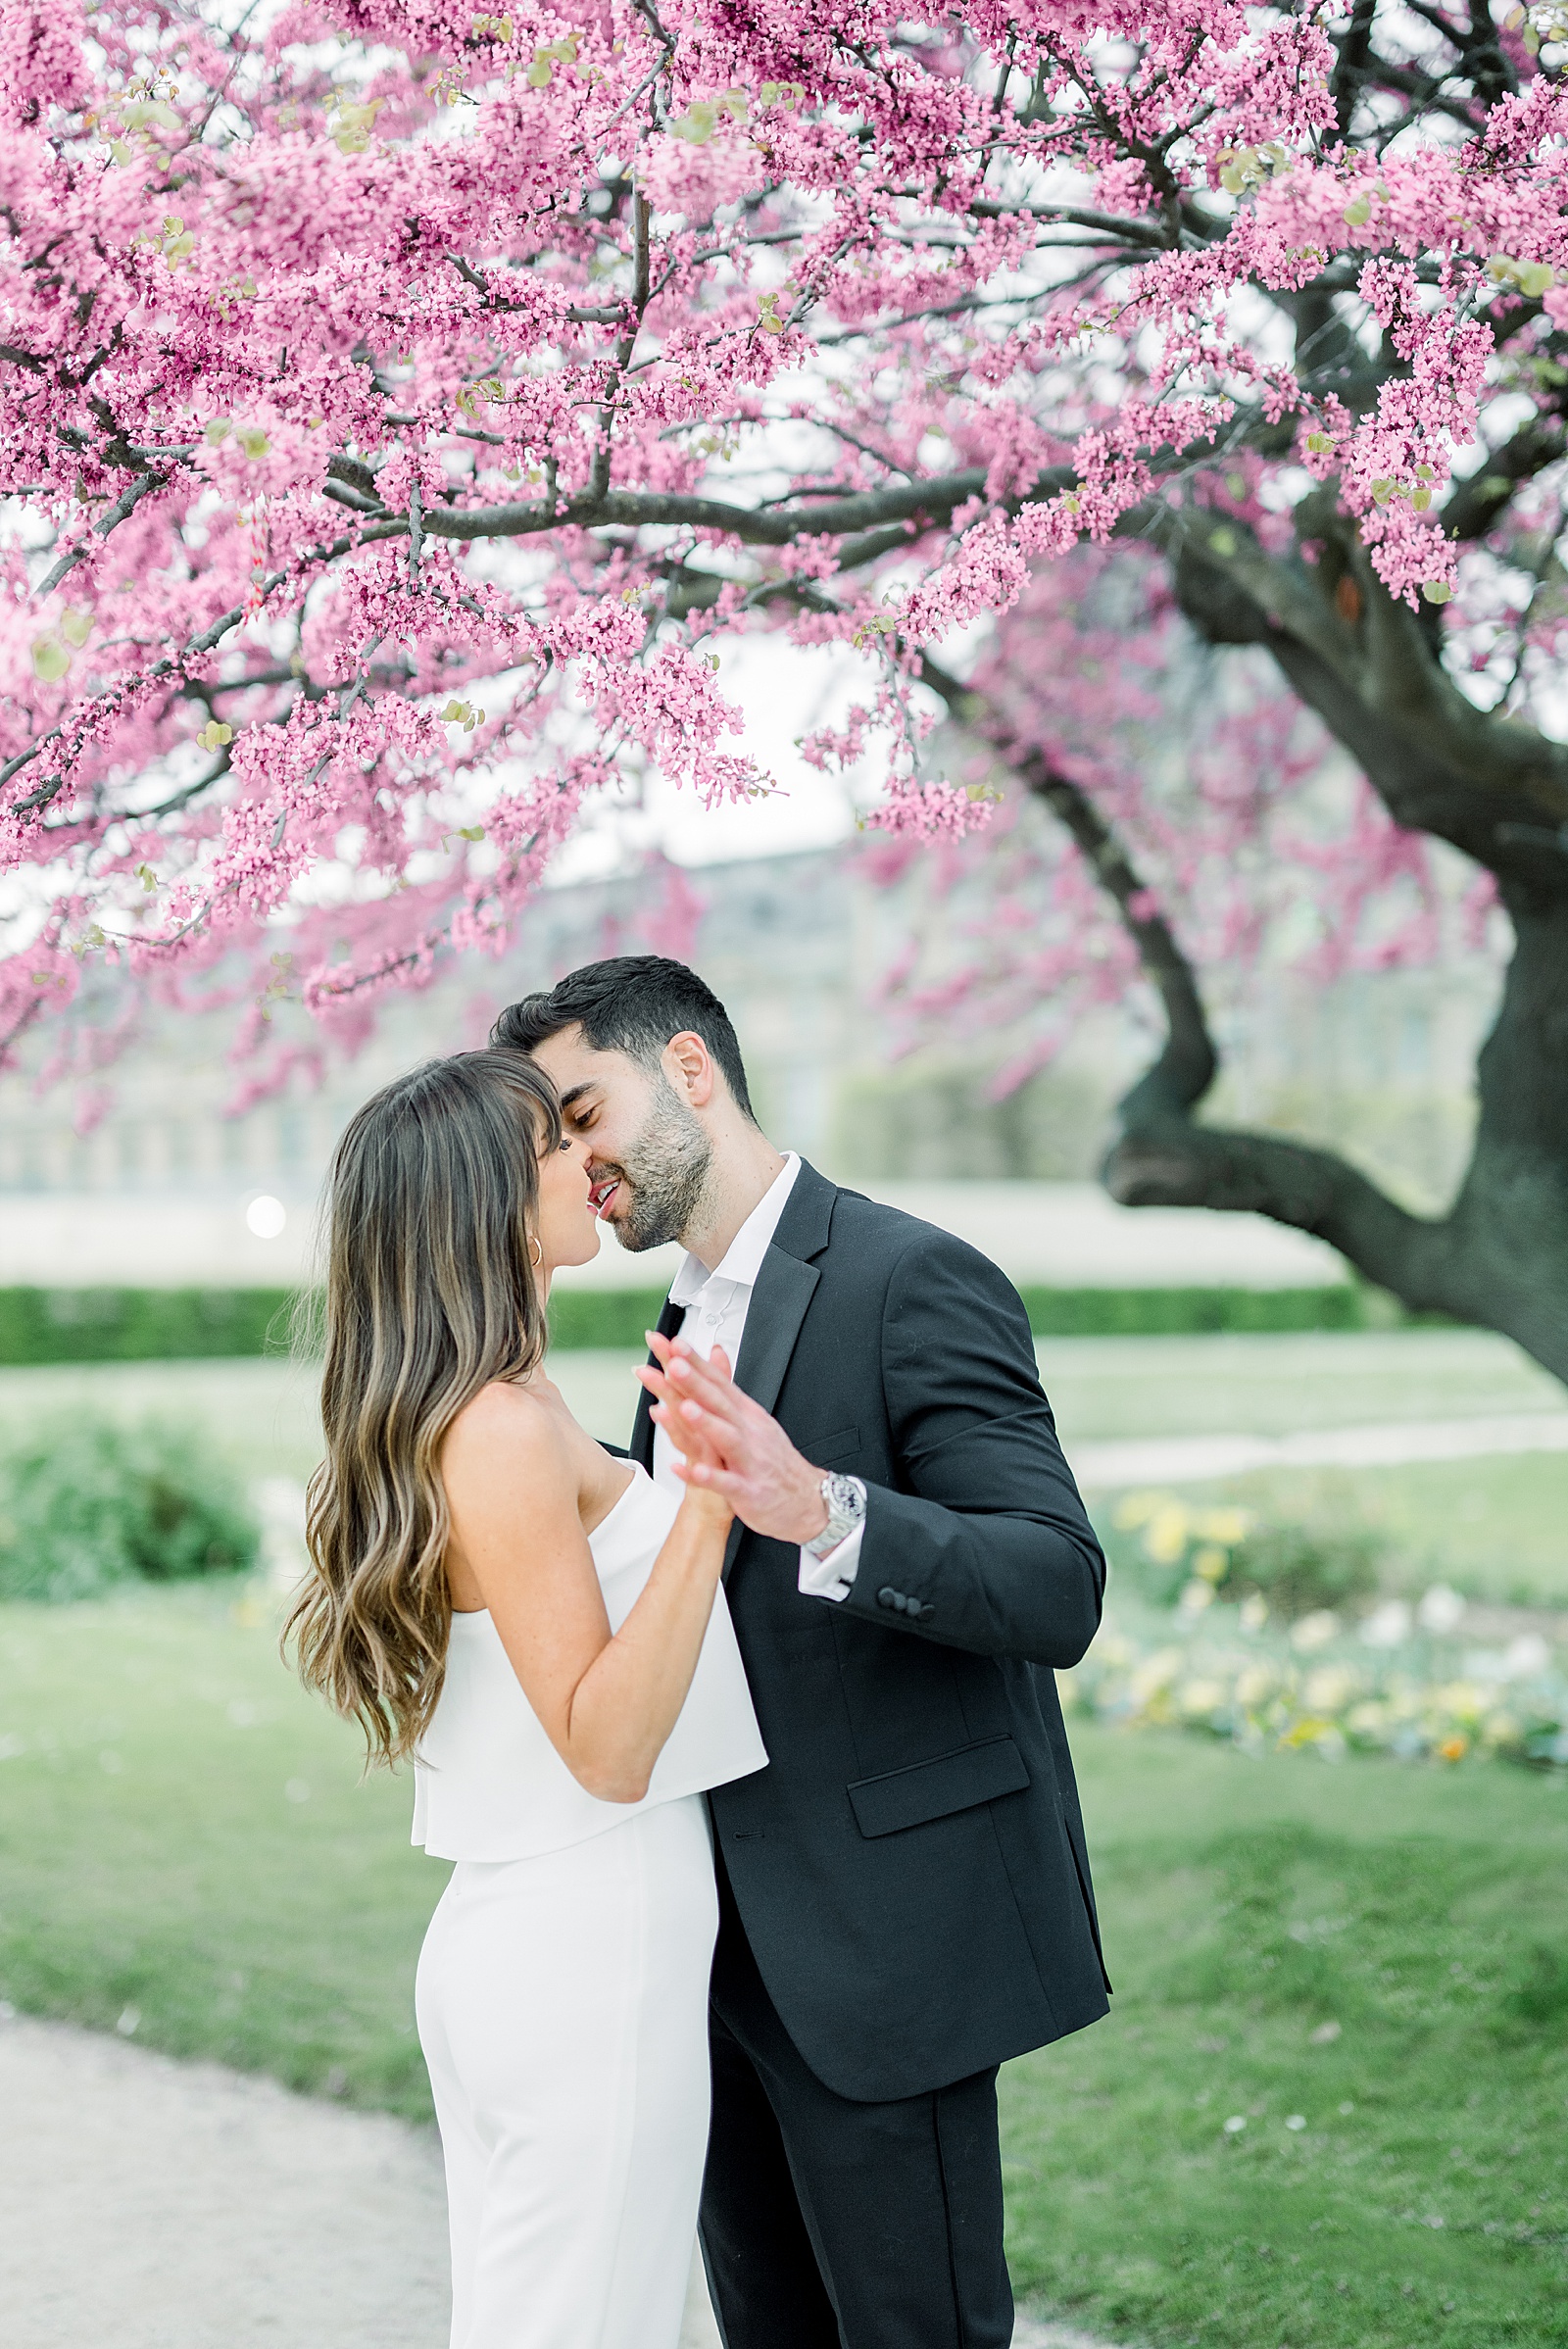 A guy and a girl share a kiss under a pink flowering tree at the jardin des tuileries